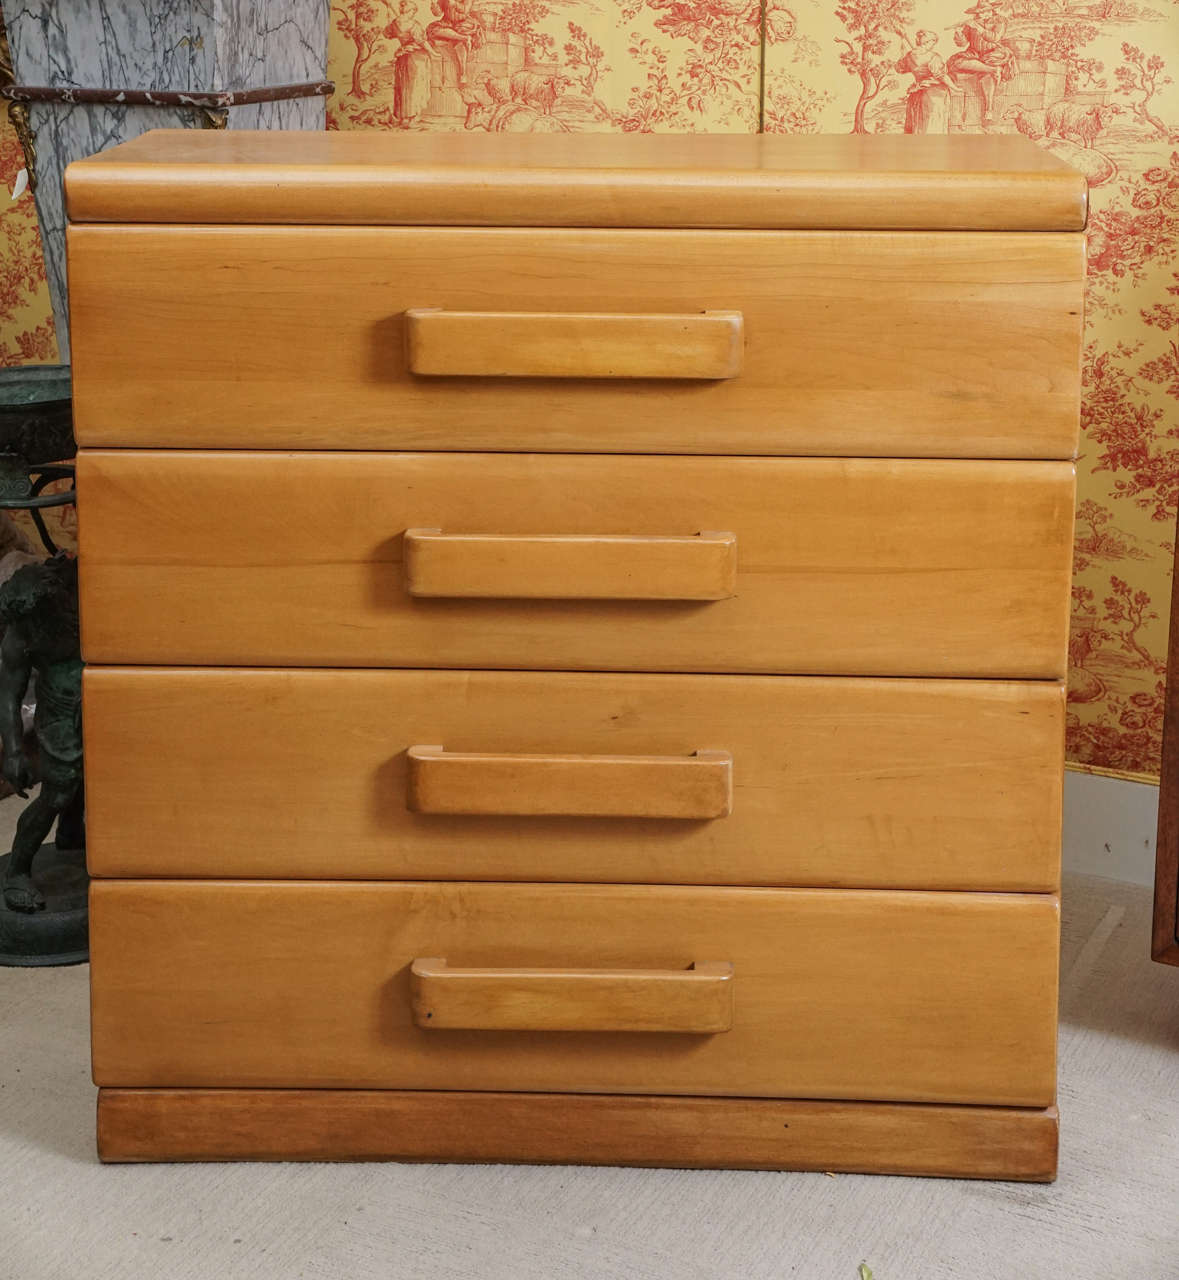 A Russel Wright chest for American modern.